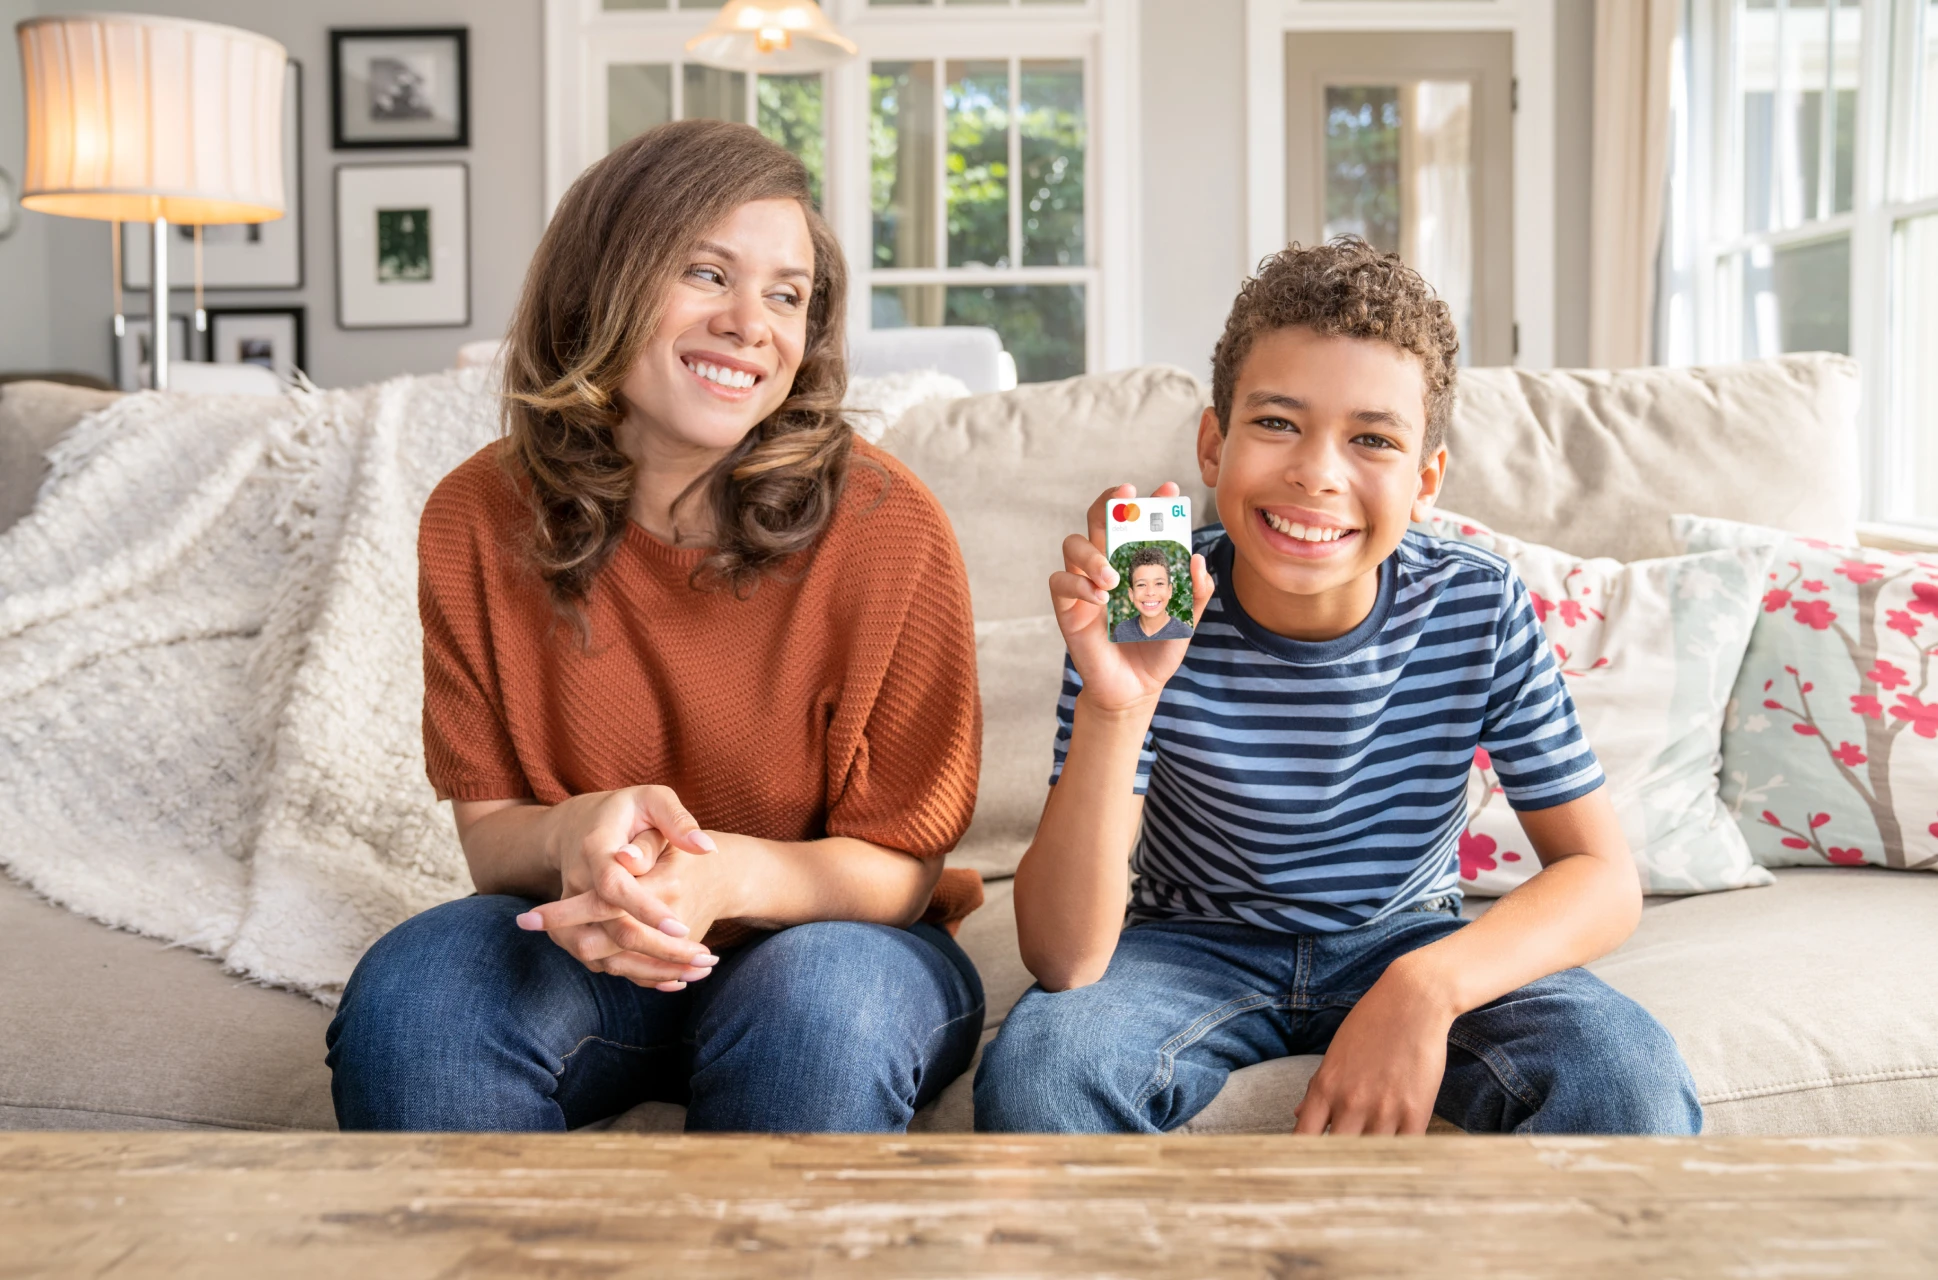 Young boy sitting on couch holding custom Greenlight debit card while mom sits next to him and watches proudly